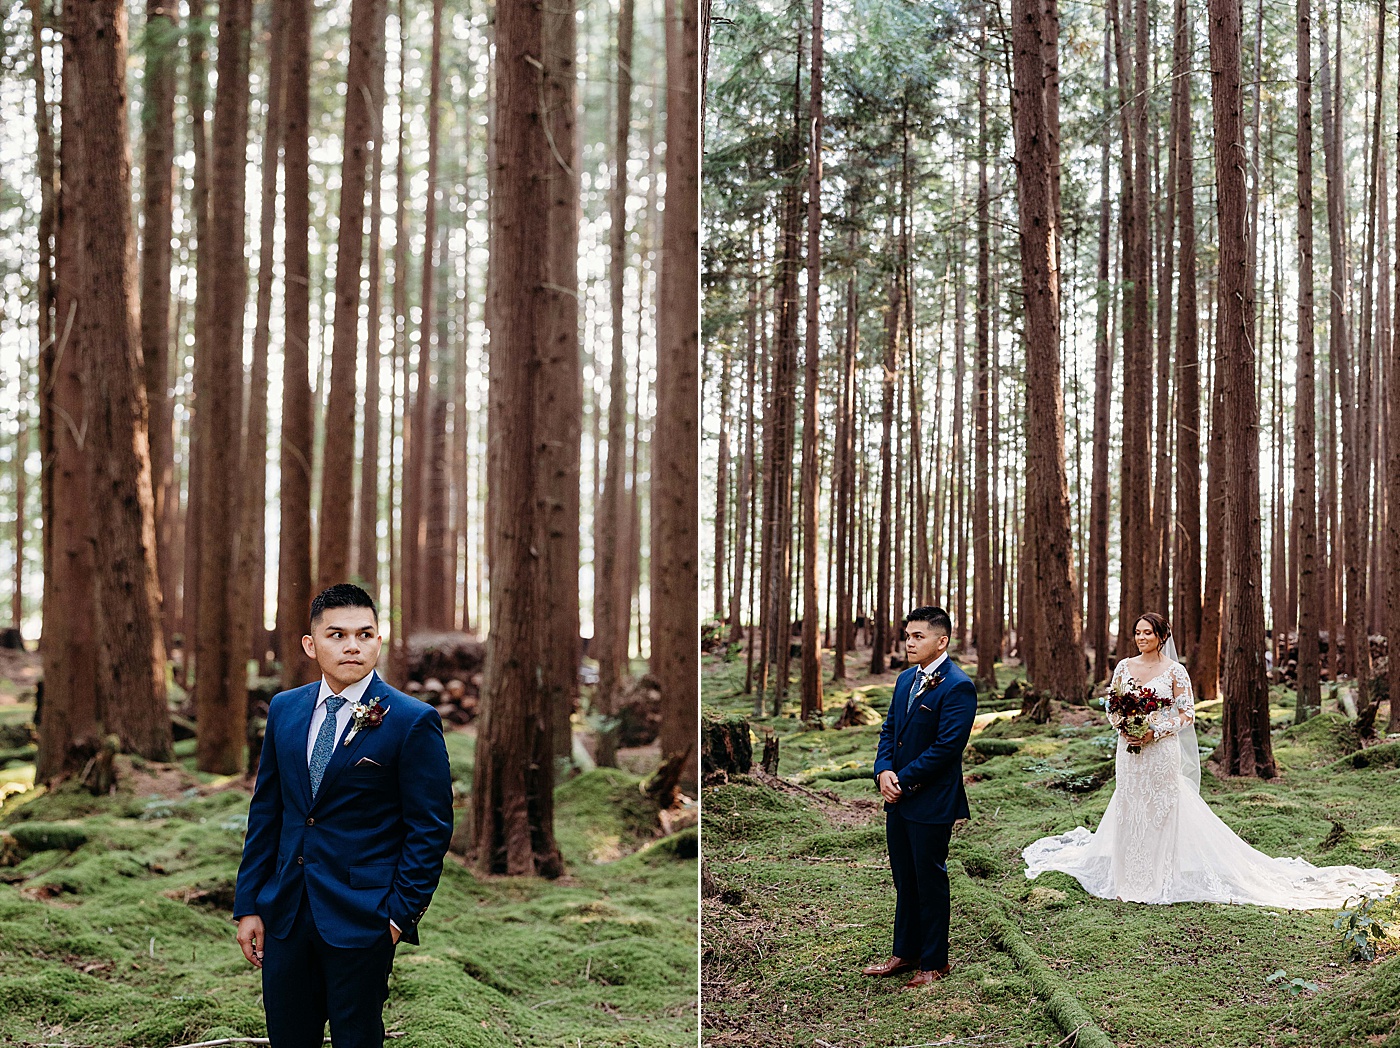 Bride and groom first look at Emerald Forest Treehouse | Photo by Megan Montalvo Photography